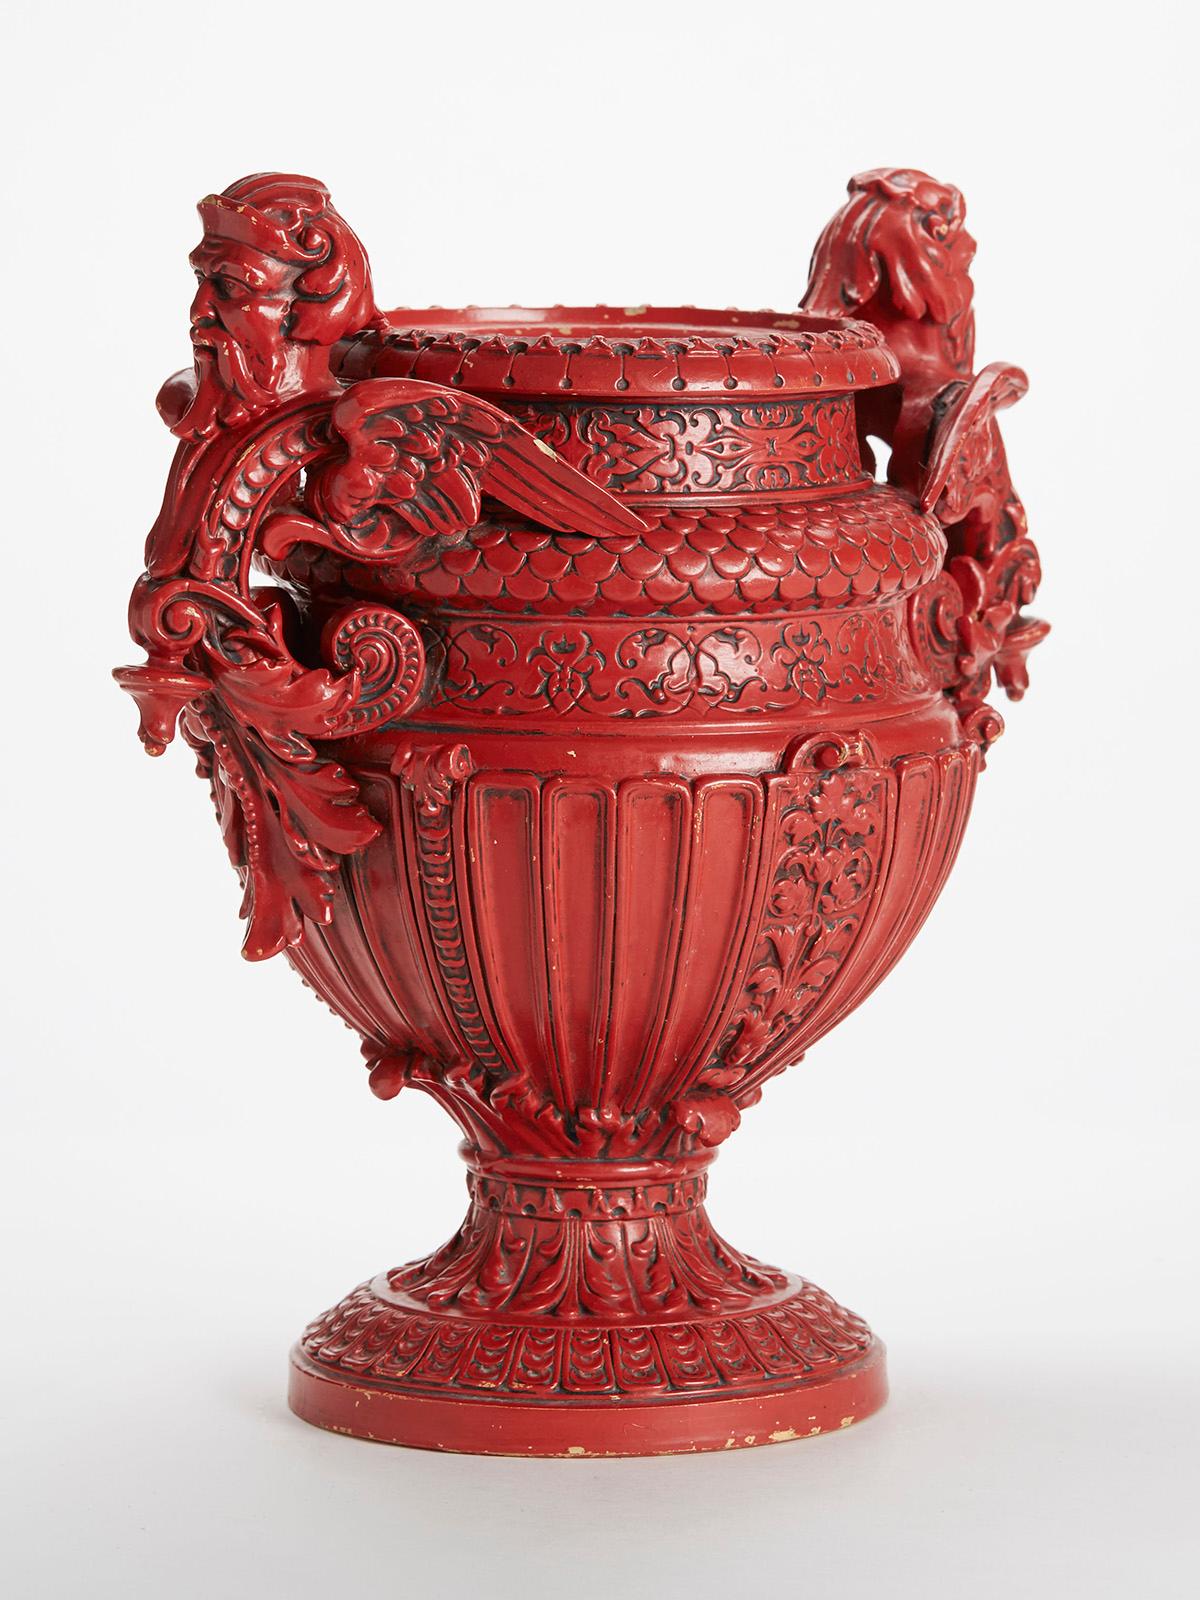 An impressive and large antique pedestal Majolica twin handled vase decorated in red glazes with relief moulded decoration and with winged god handles with moulded scroll and leaf designs. The heavily made earthenware vase stands on a rounded